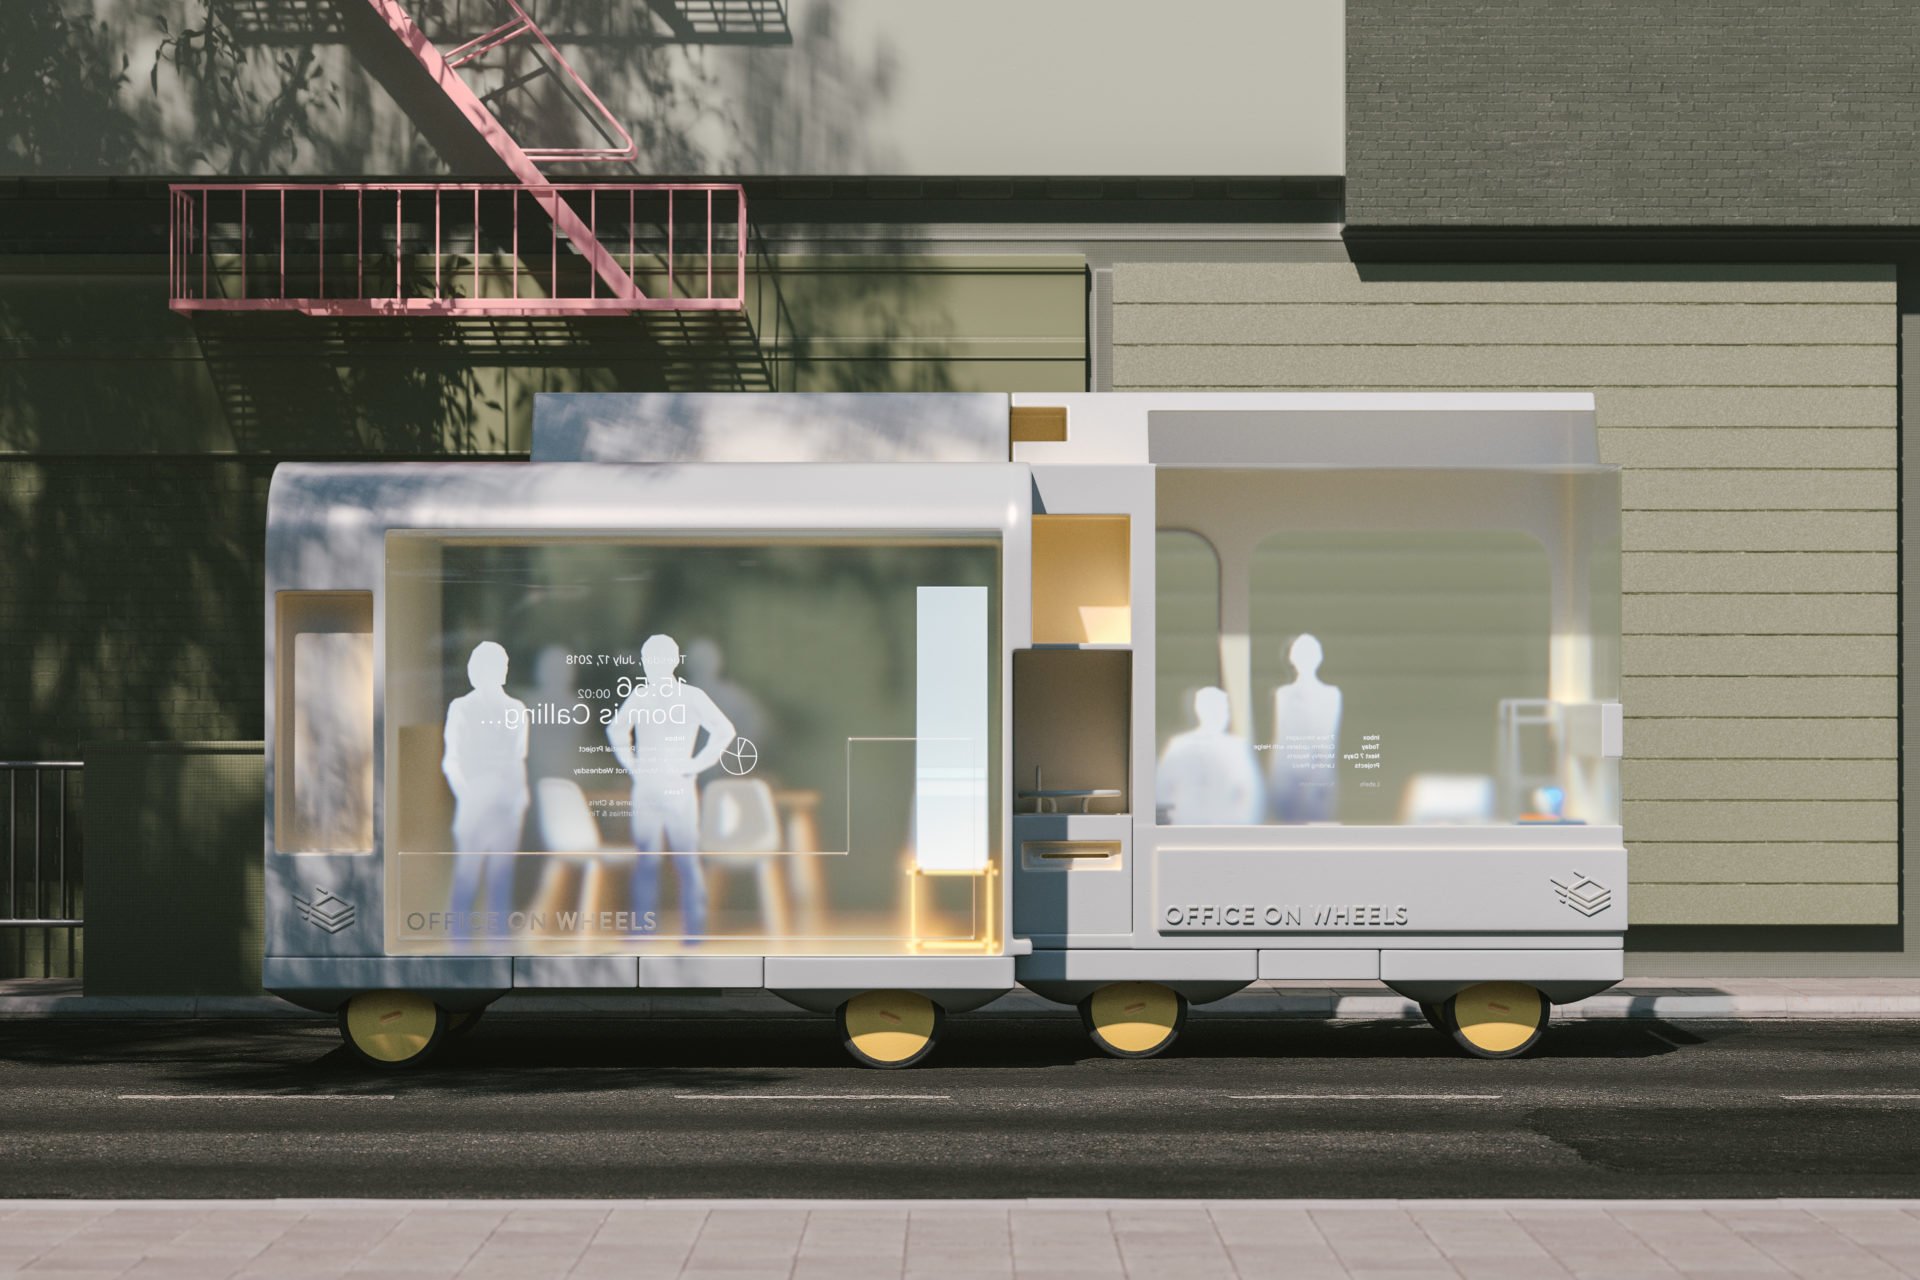 The Office on Wheels prototype transports you to work while you can make up time by doing work or taking calls. Source: IKEA